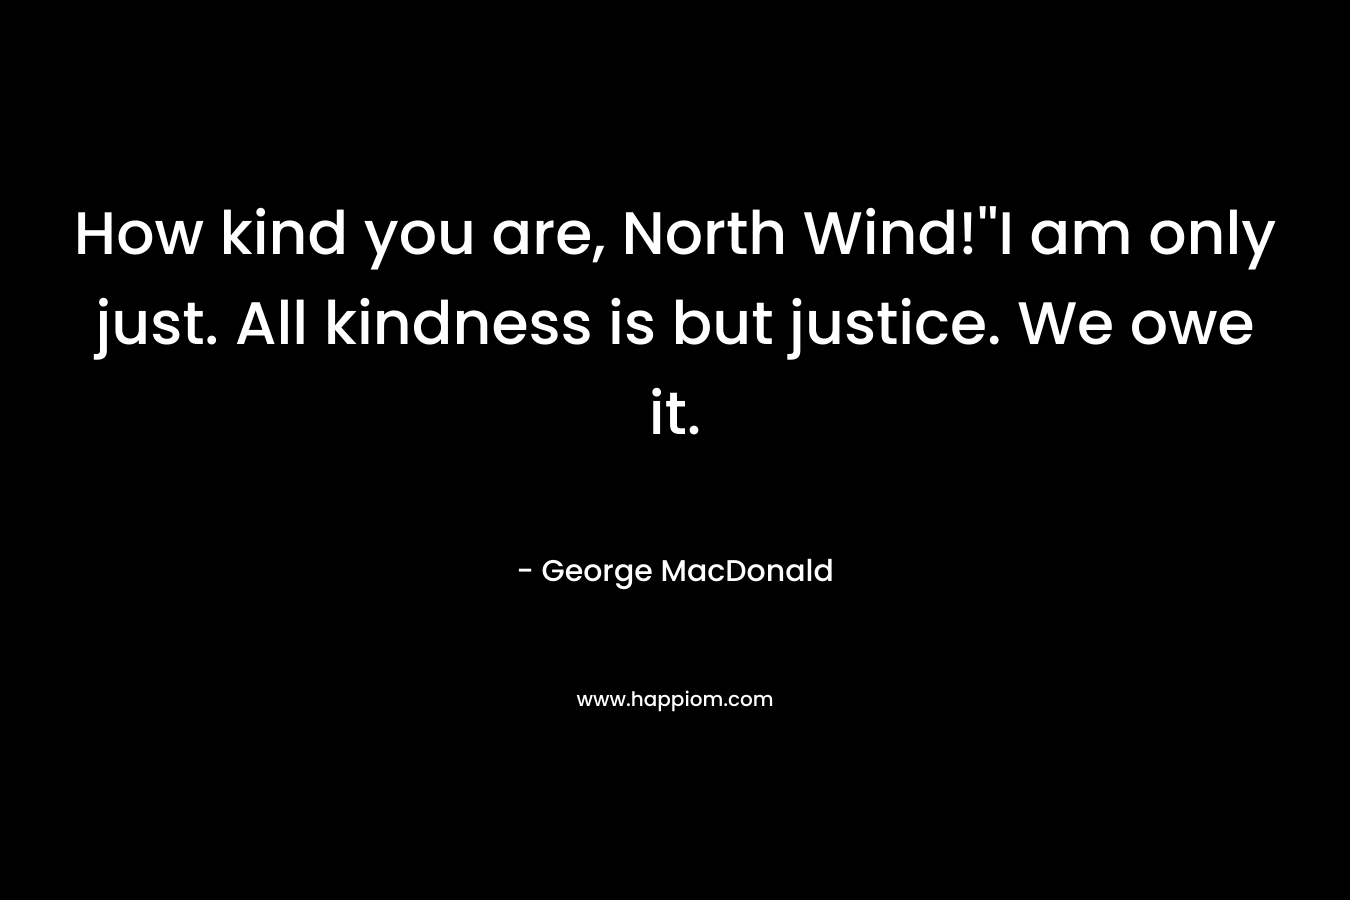 How kind you are, North Wind!”I am only just. All kindness is but justice. We owe it. – George MacDonald